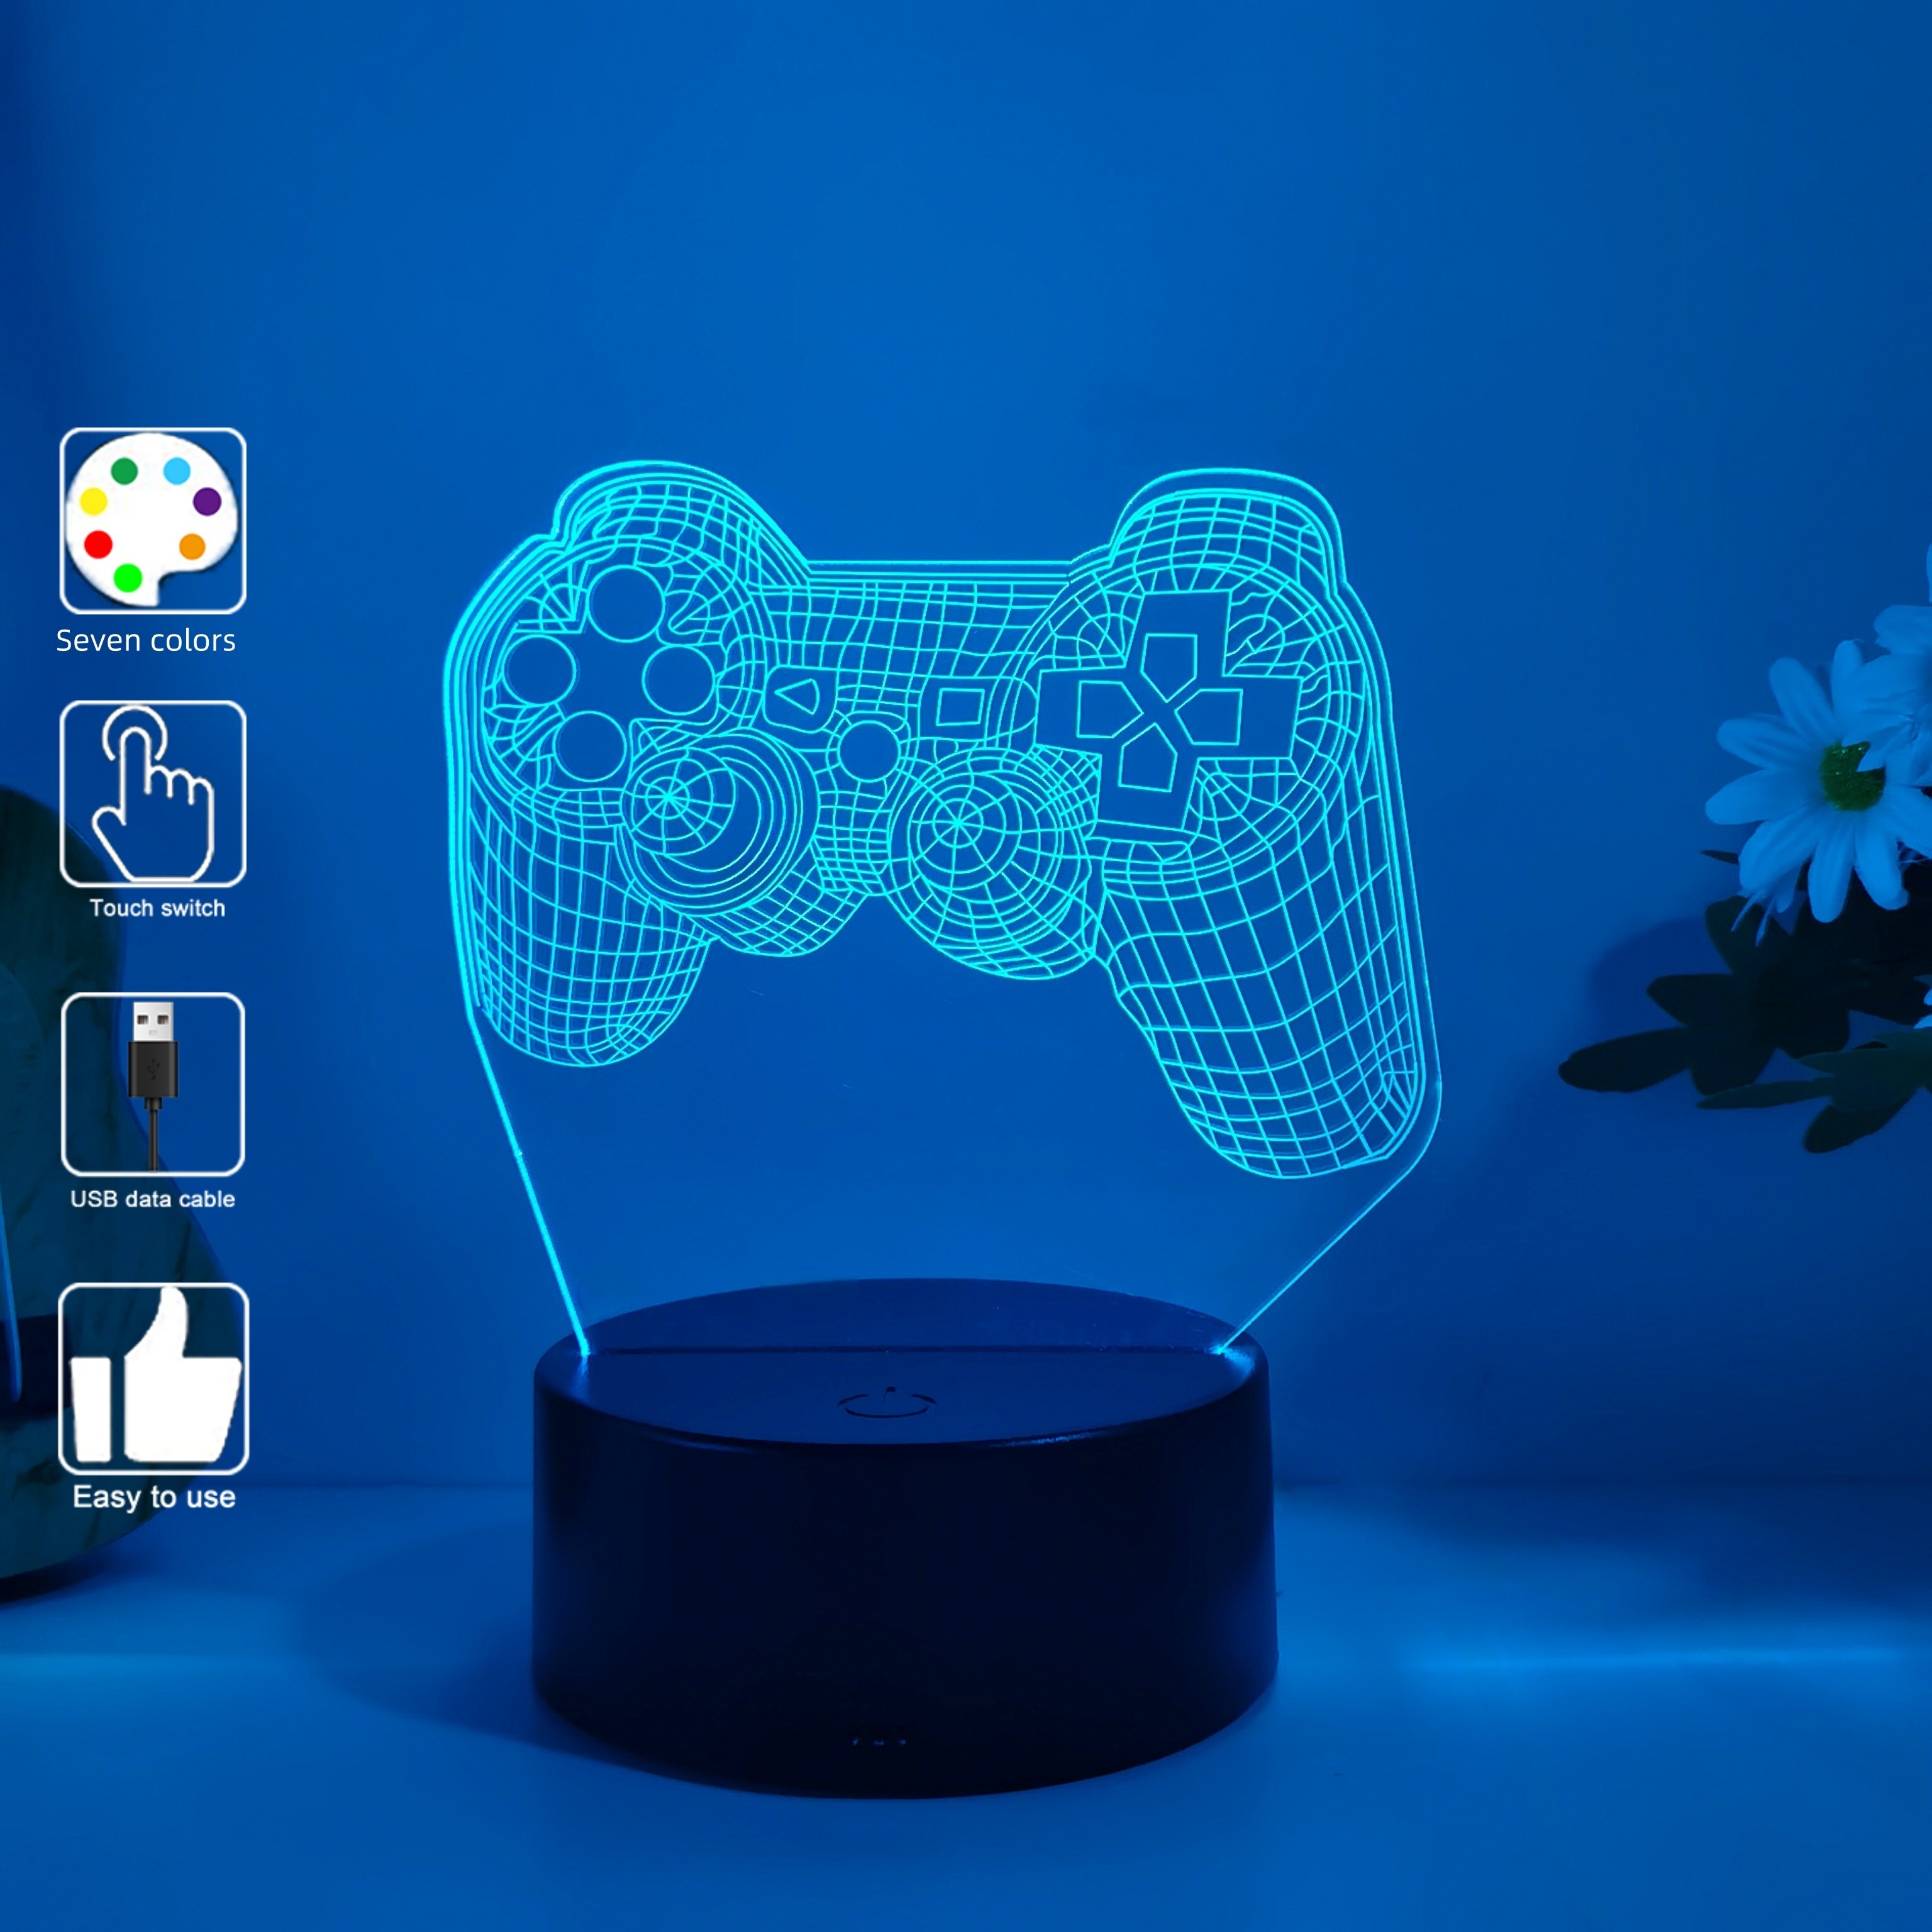 

1pc Game Controller Modern Transparent Acrylic 3d Nightlight, Game Player Collection Gift Nightlight, Usb Interface, 7 Colors, Touch Control Atmosphere Decoration Table Light